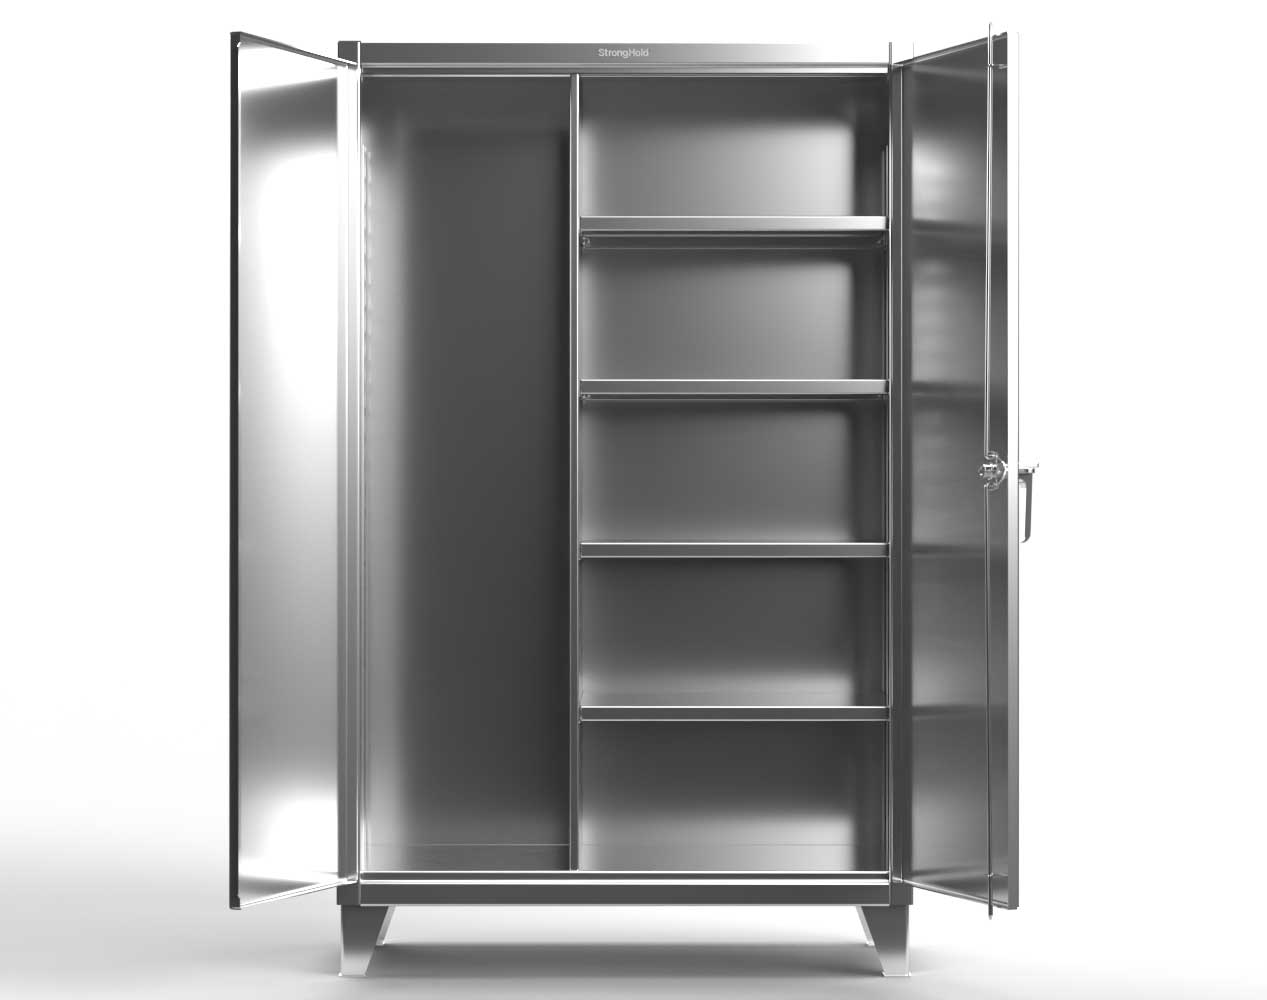 Extreme Duty 12 GA Stainless Steel Janitorial Cabinet with 4 Shelves - 72 In. W x 24 In. D x 78 In. H